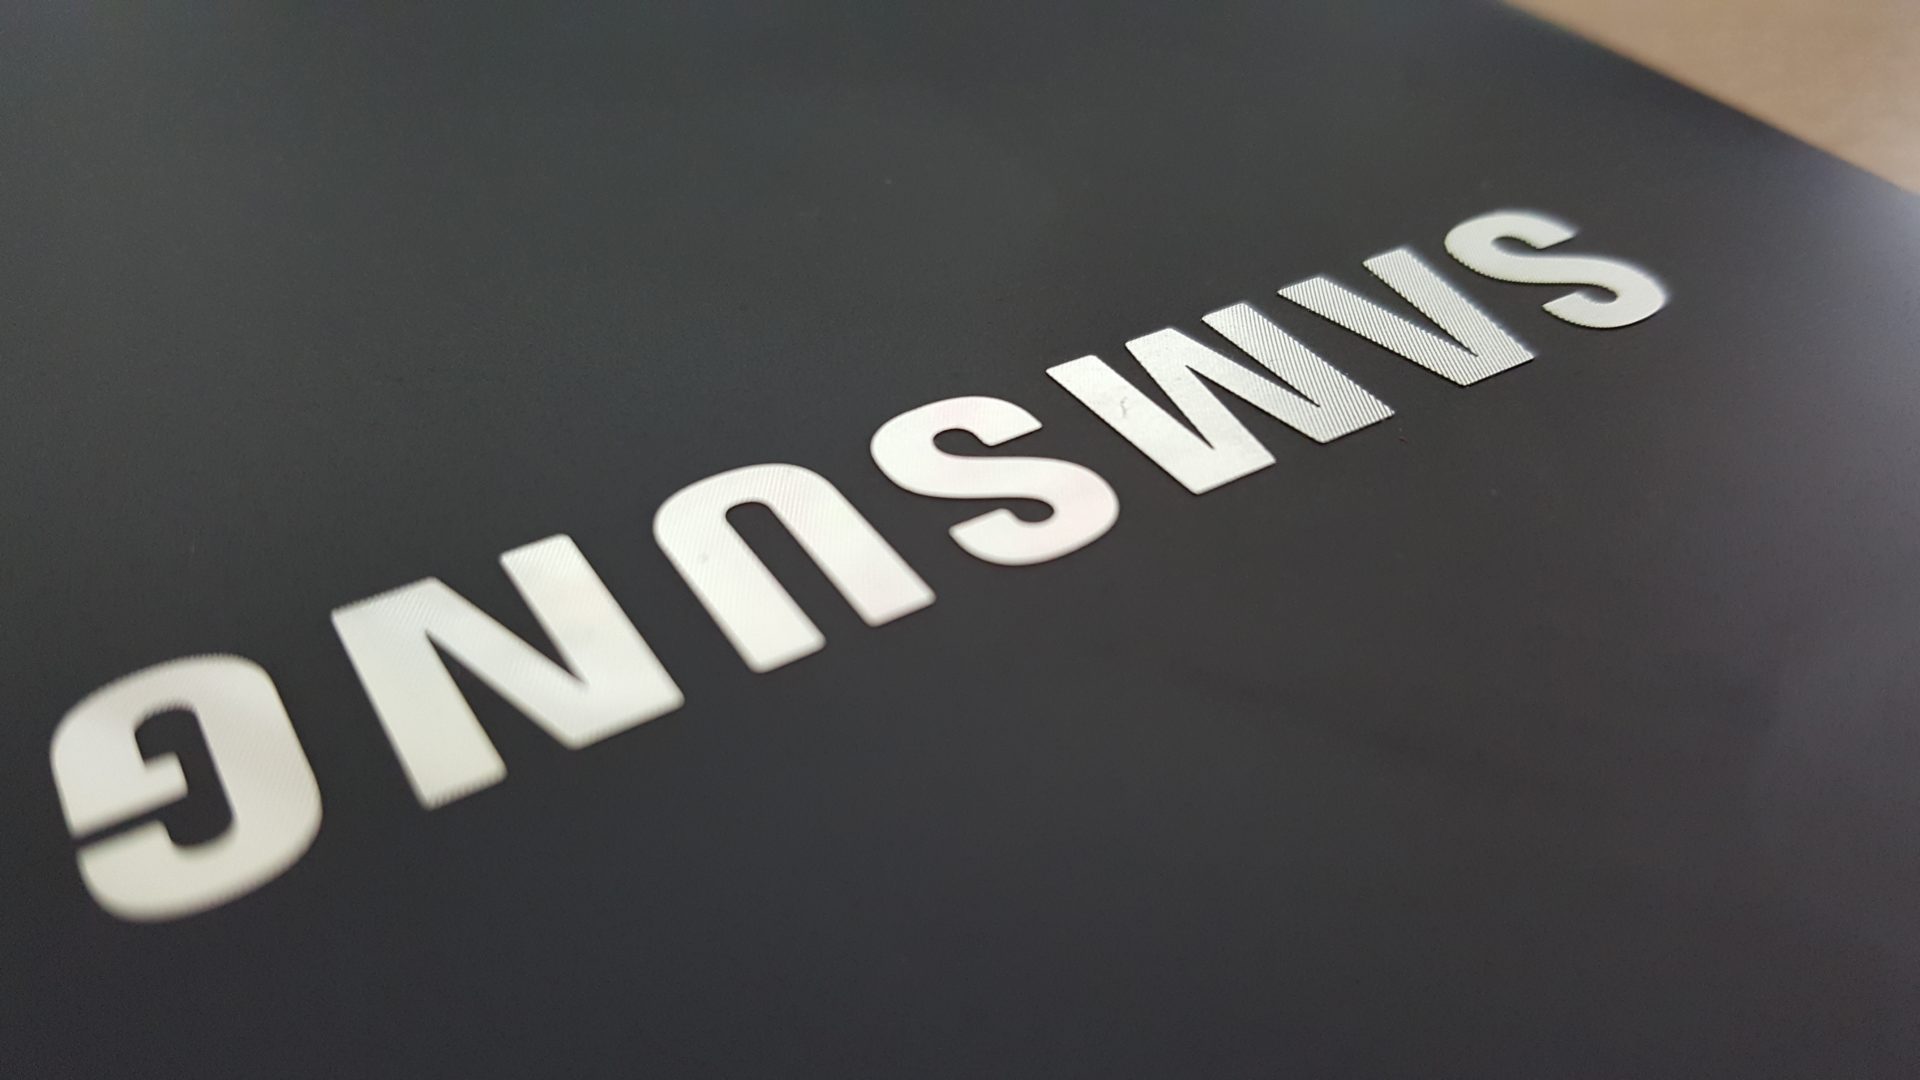  samsung countries baltic platform accepts cryptopayments three 